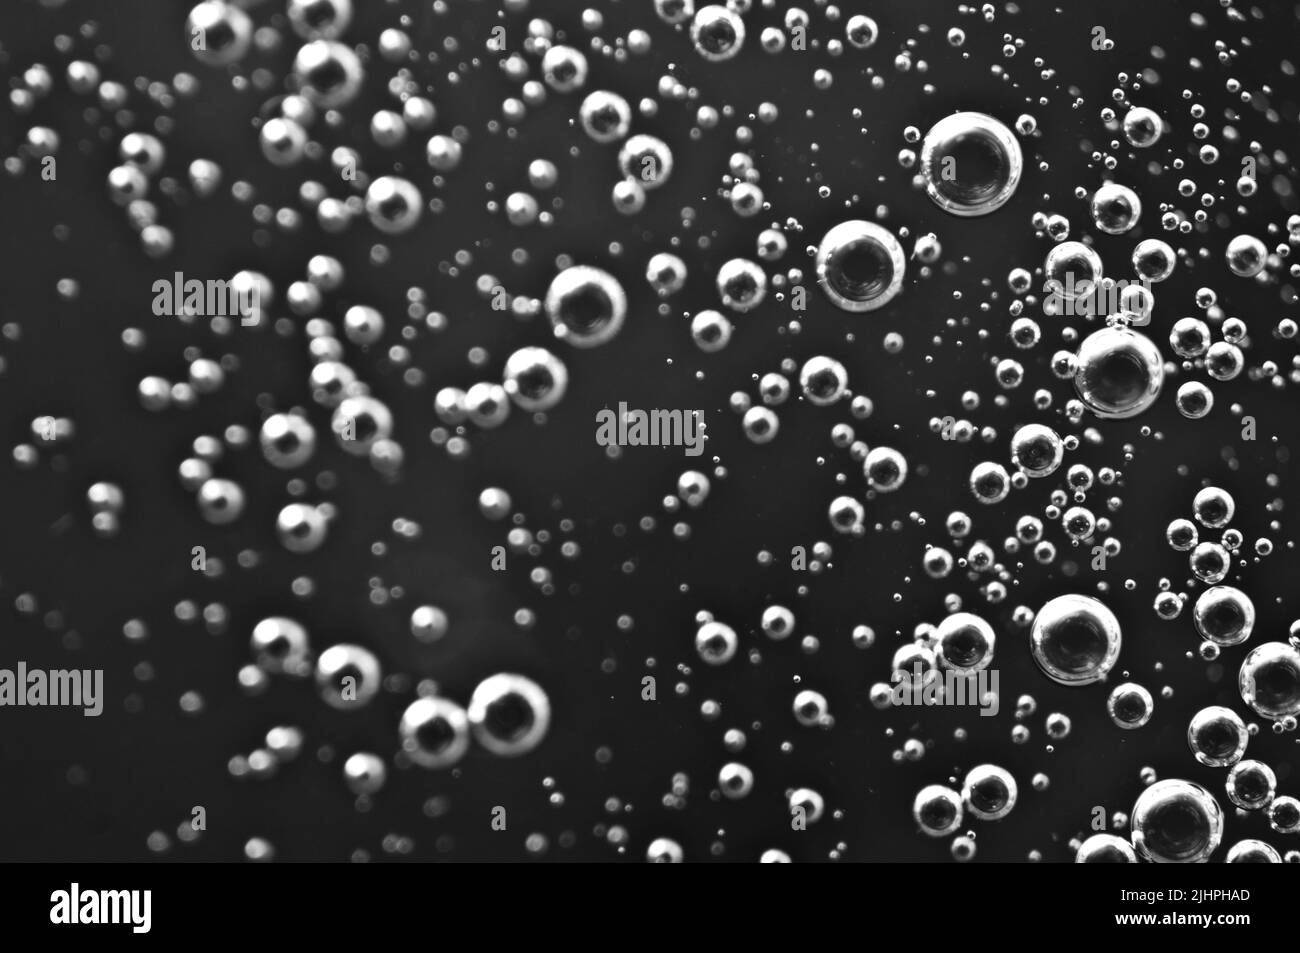 Dark oil with bubbles. Bubbles in liquid. Black and white. Oil concept. Oil business concept and petrol production Stock Photo